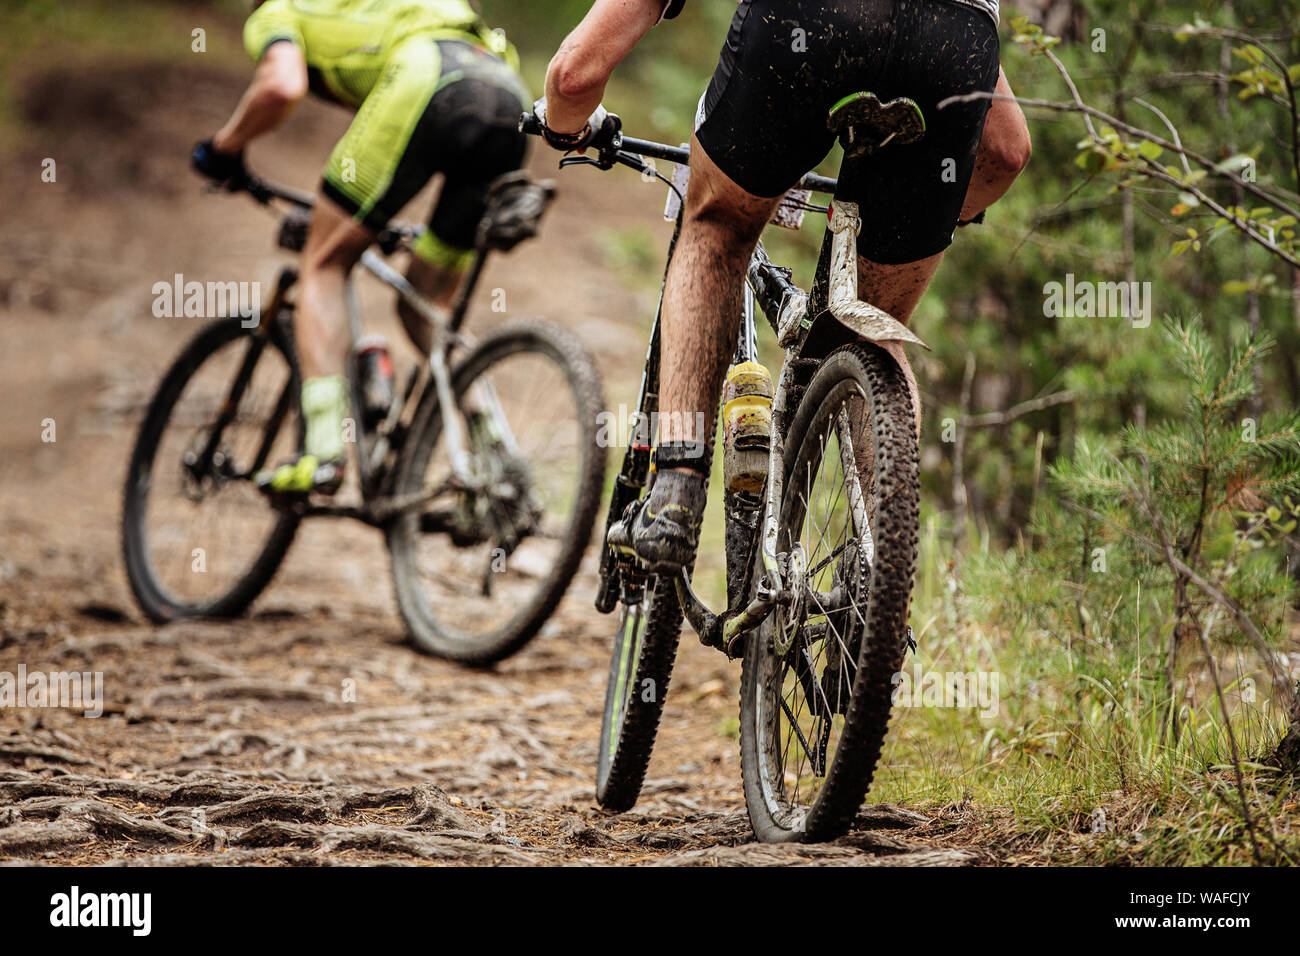 back two cyclists on mountain bike riding uphill in roots of trees Stock Photo